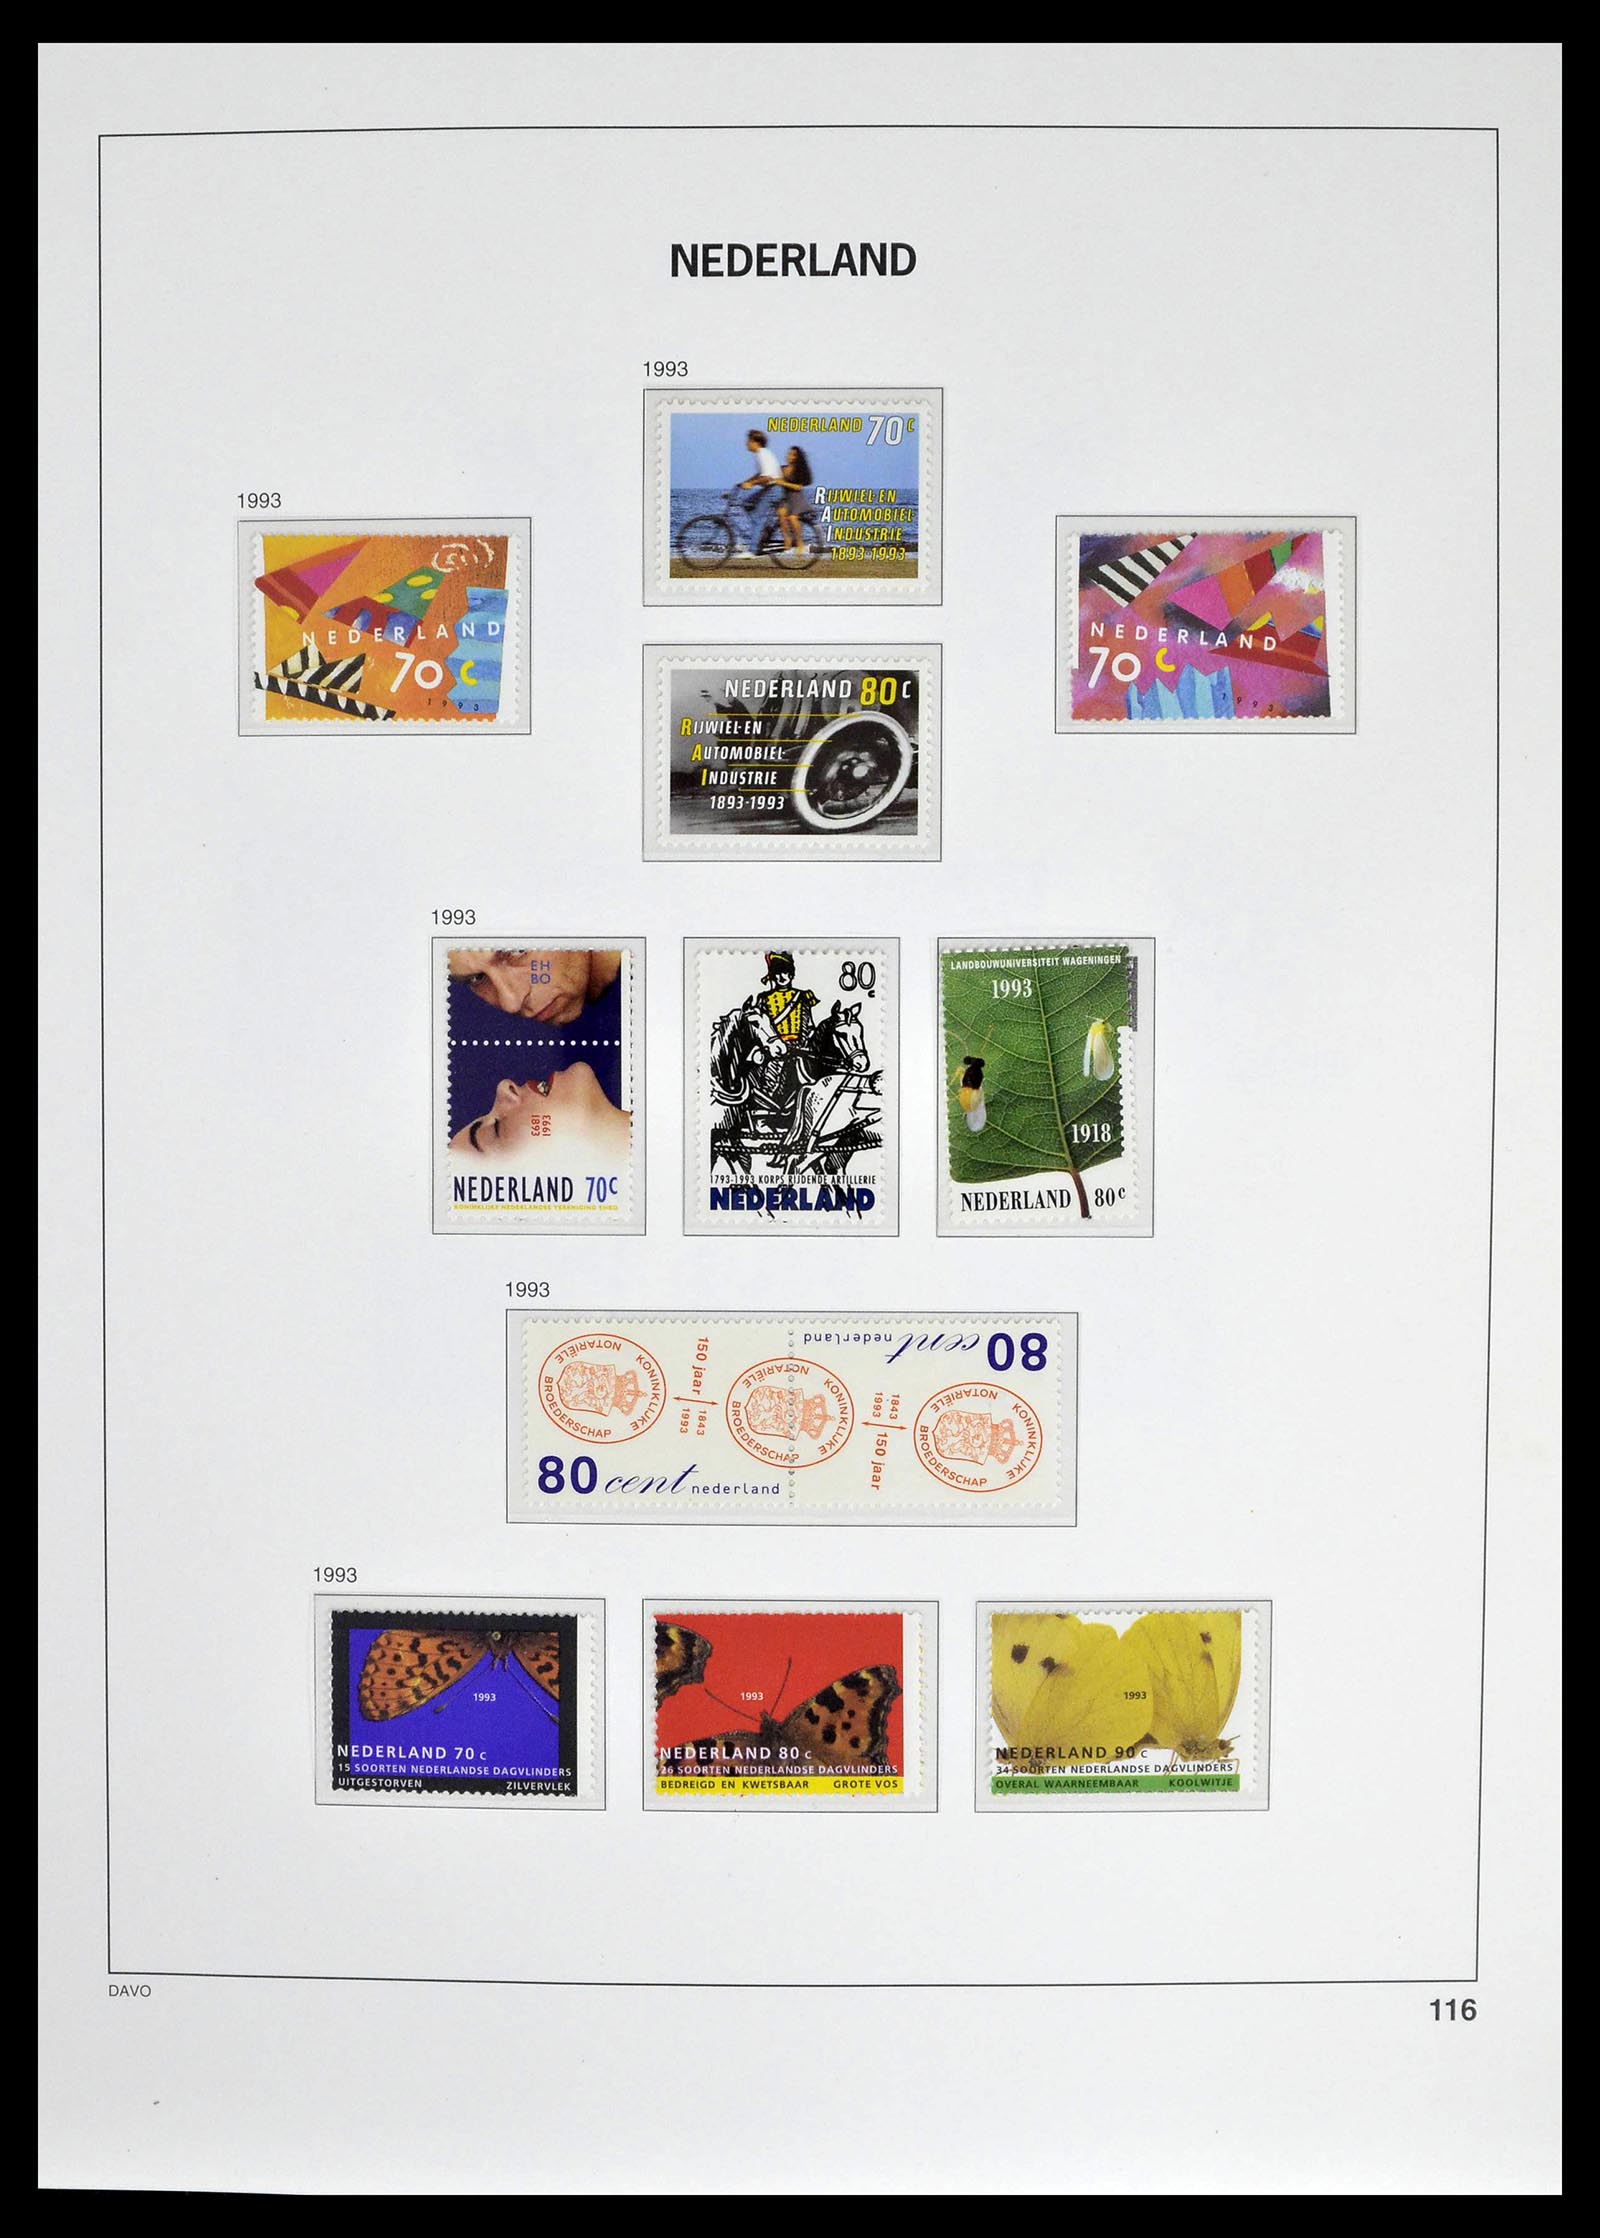 39136 0067 - Stamp collection 39136 Netherlands 1975-2020!